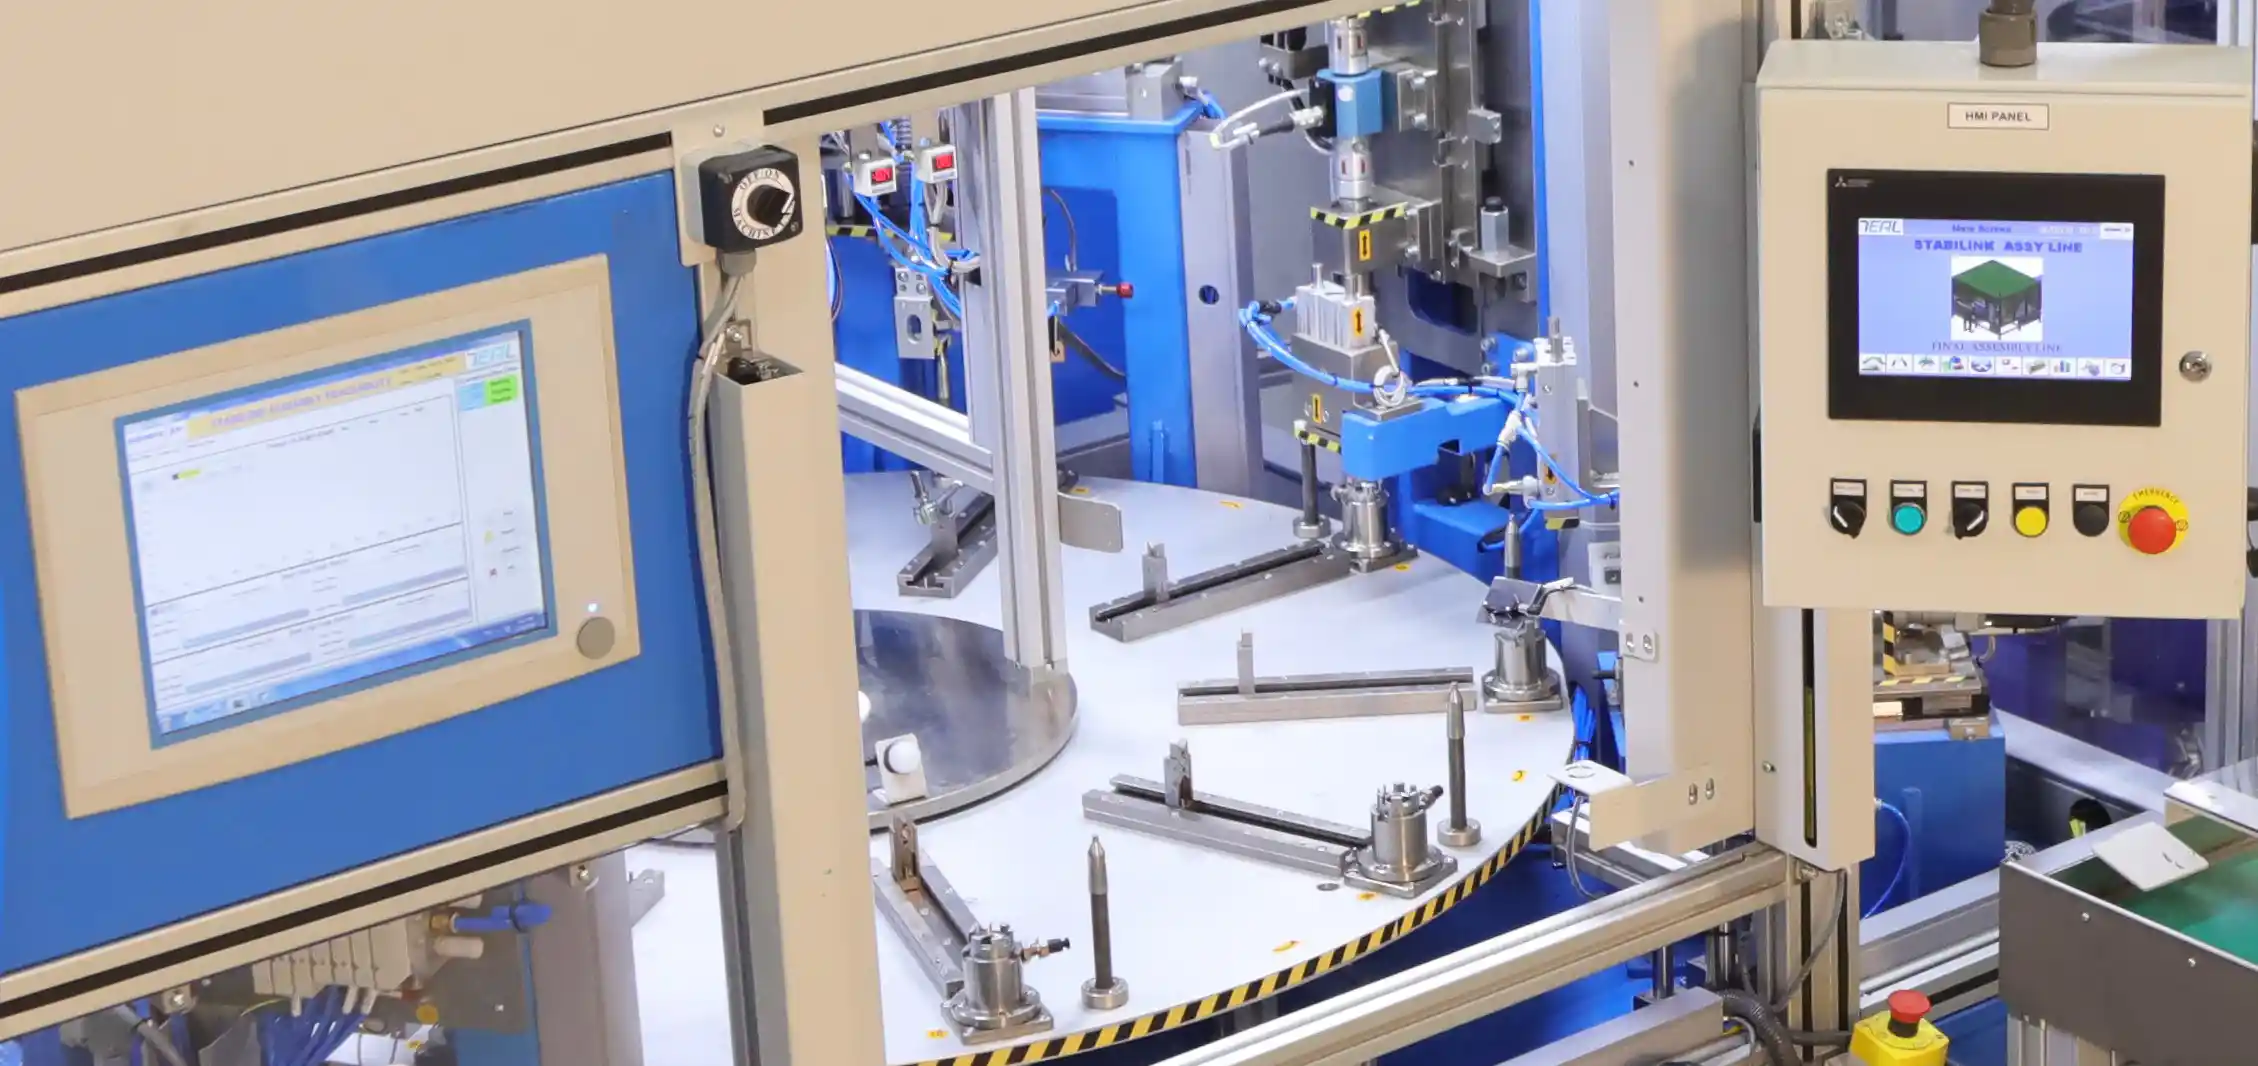 Titan engineering and automation Limited (TEAL) Fully Automatic Assembly Line